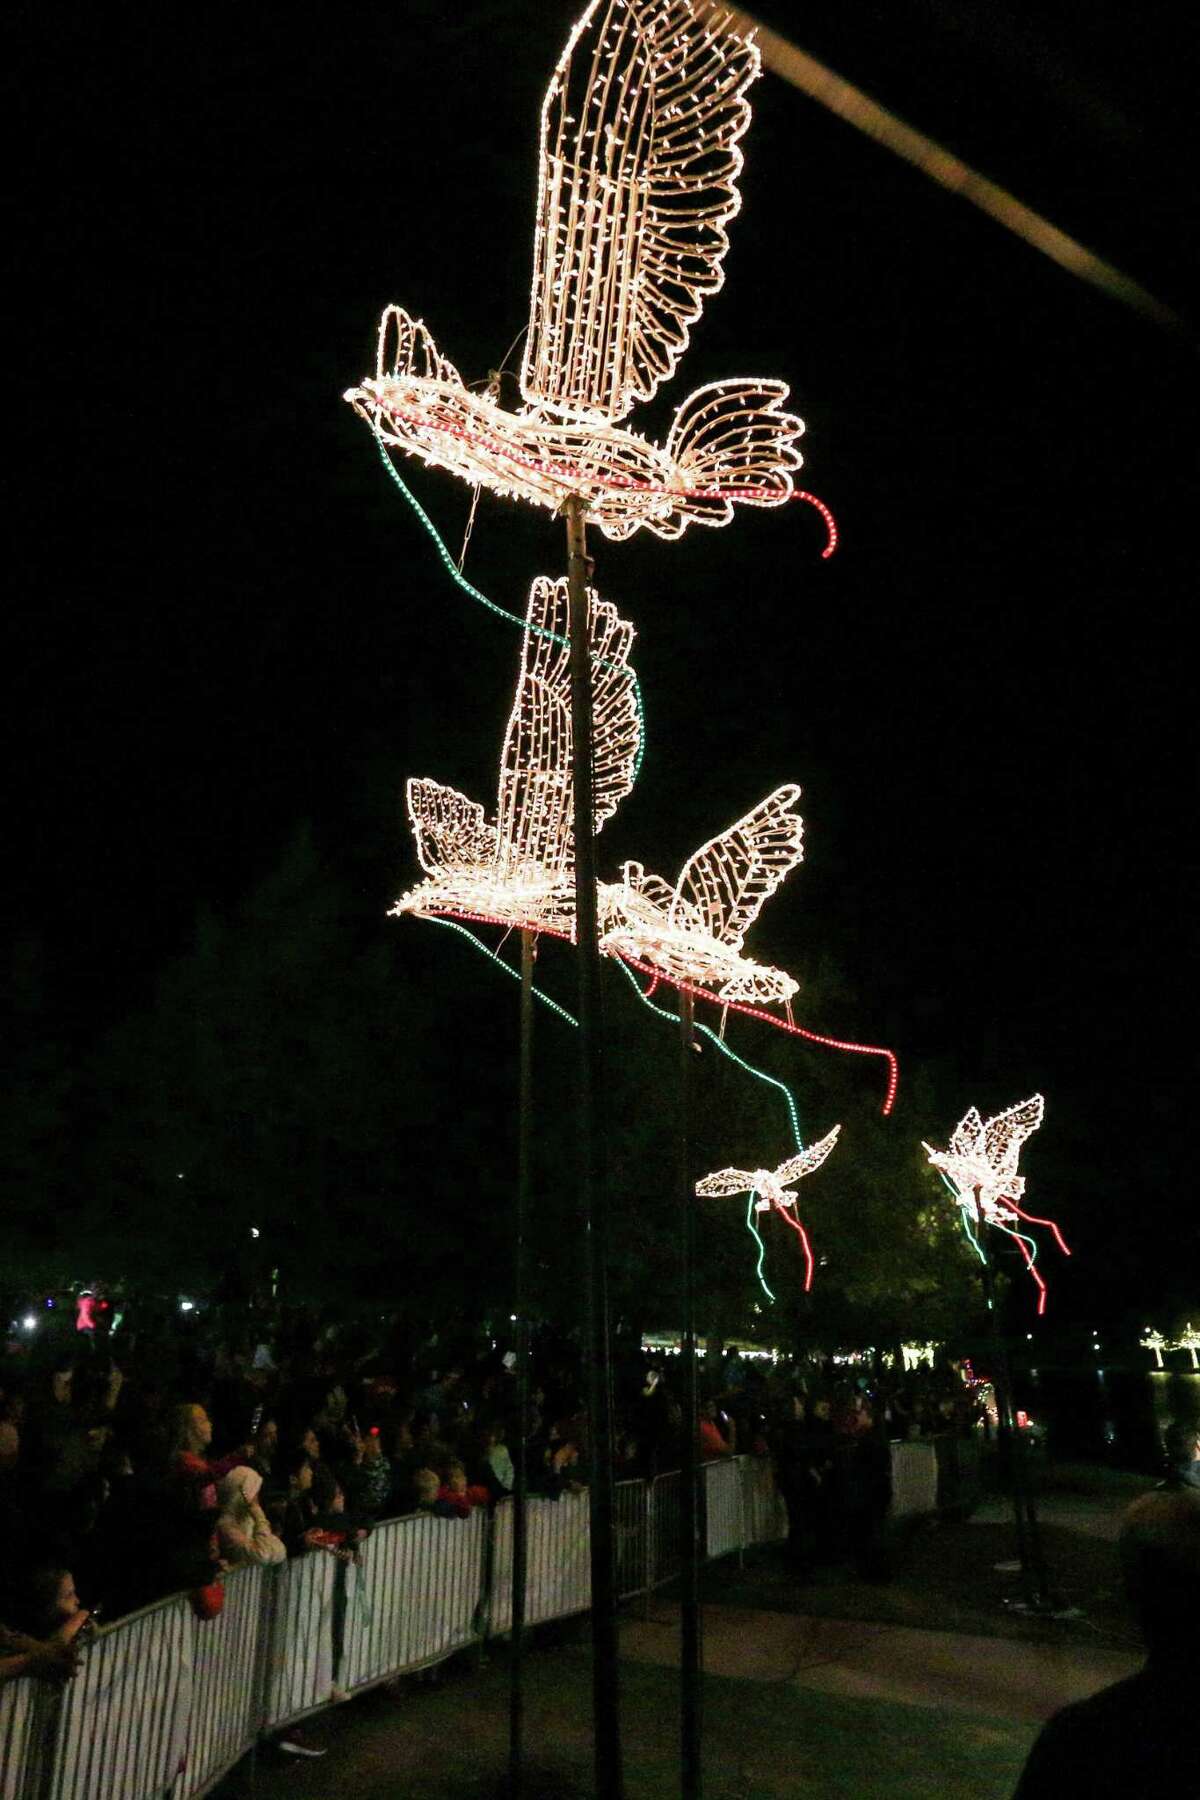 The annual Lighting of the Doves and greeting of Santa Claus will be a little different this year tha in past events. The annual tradition will happen on Saturday, Nov. 21, with a time to be determined. Several dove sculptures burst to light during the Lighting of the Doves event on Saturday, Nov. 18, 2017, at Town Green Park.